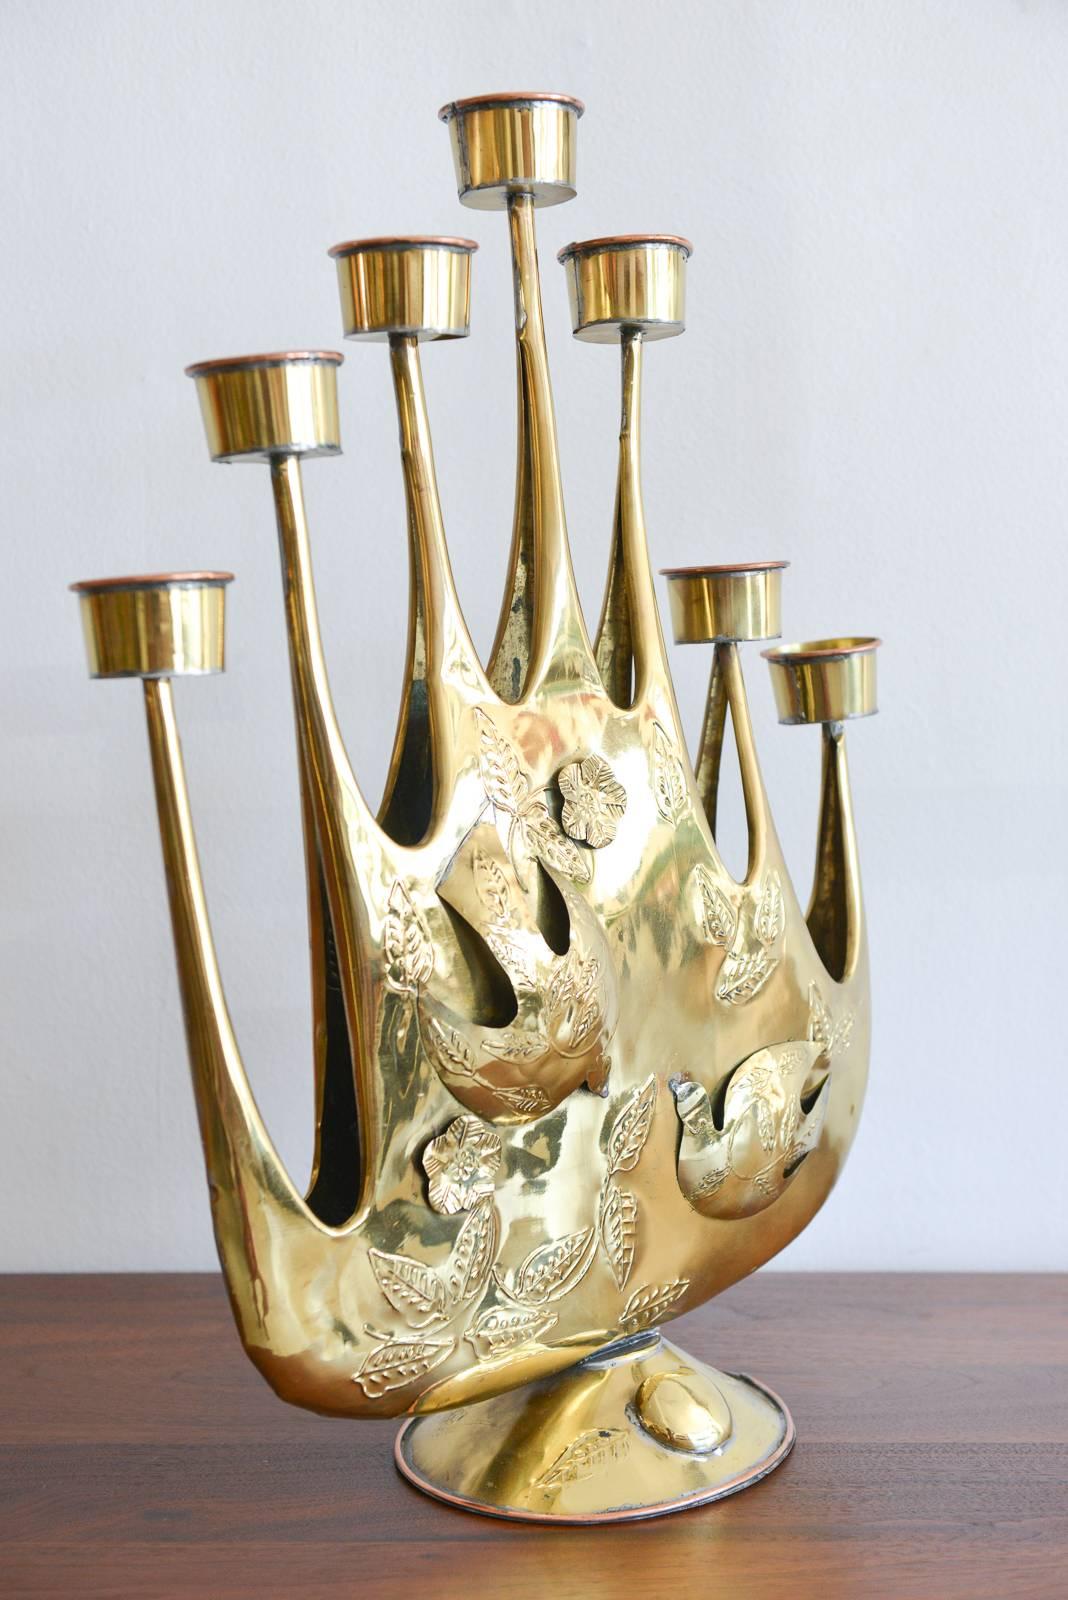 Rare and beautiful brass plated Brutalist tin candelabra by Mexican artist Gene Byron. Handmade of hand-hammered tin with lovely detail, this beautiful piece was also featured in the Verna Cook Shipway Mexican modernism design books of the 1960s.